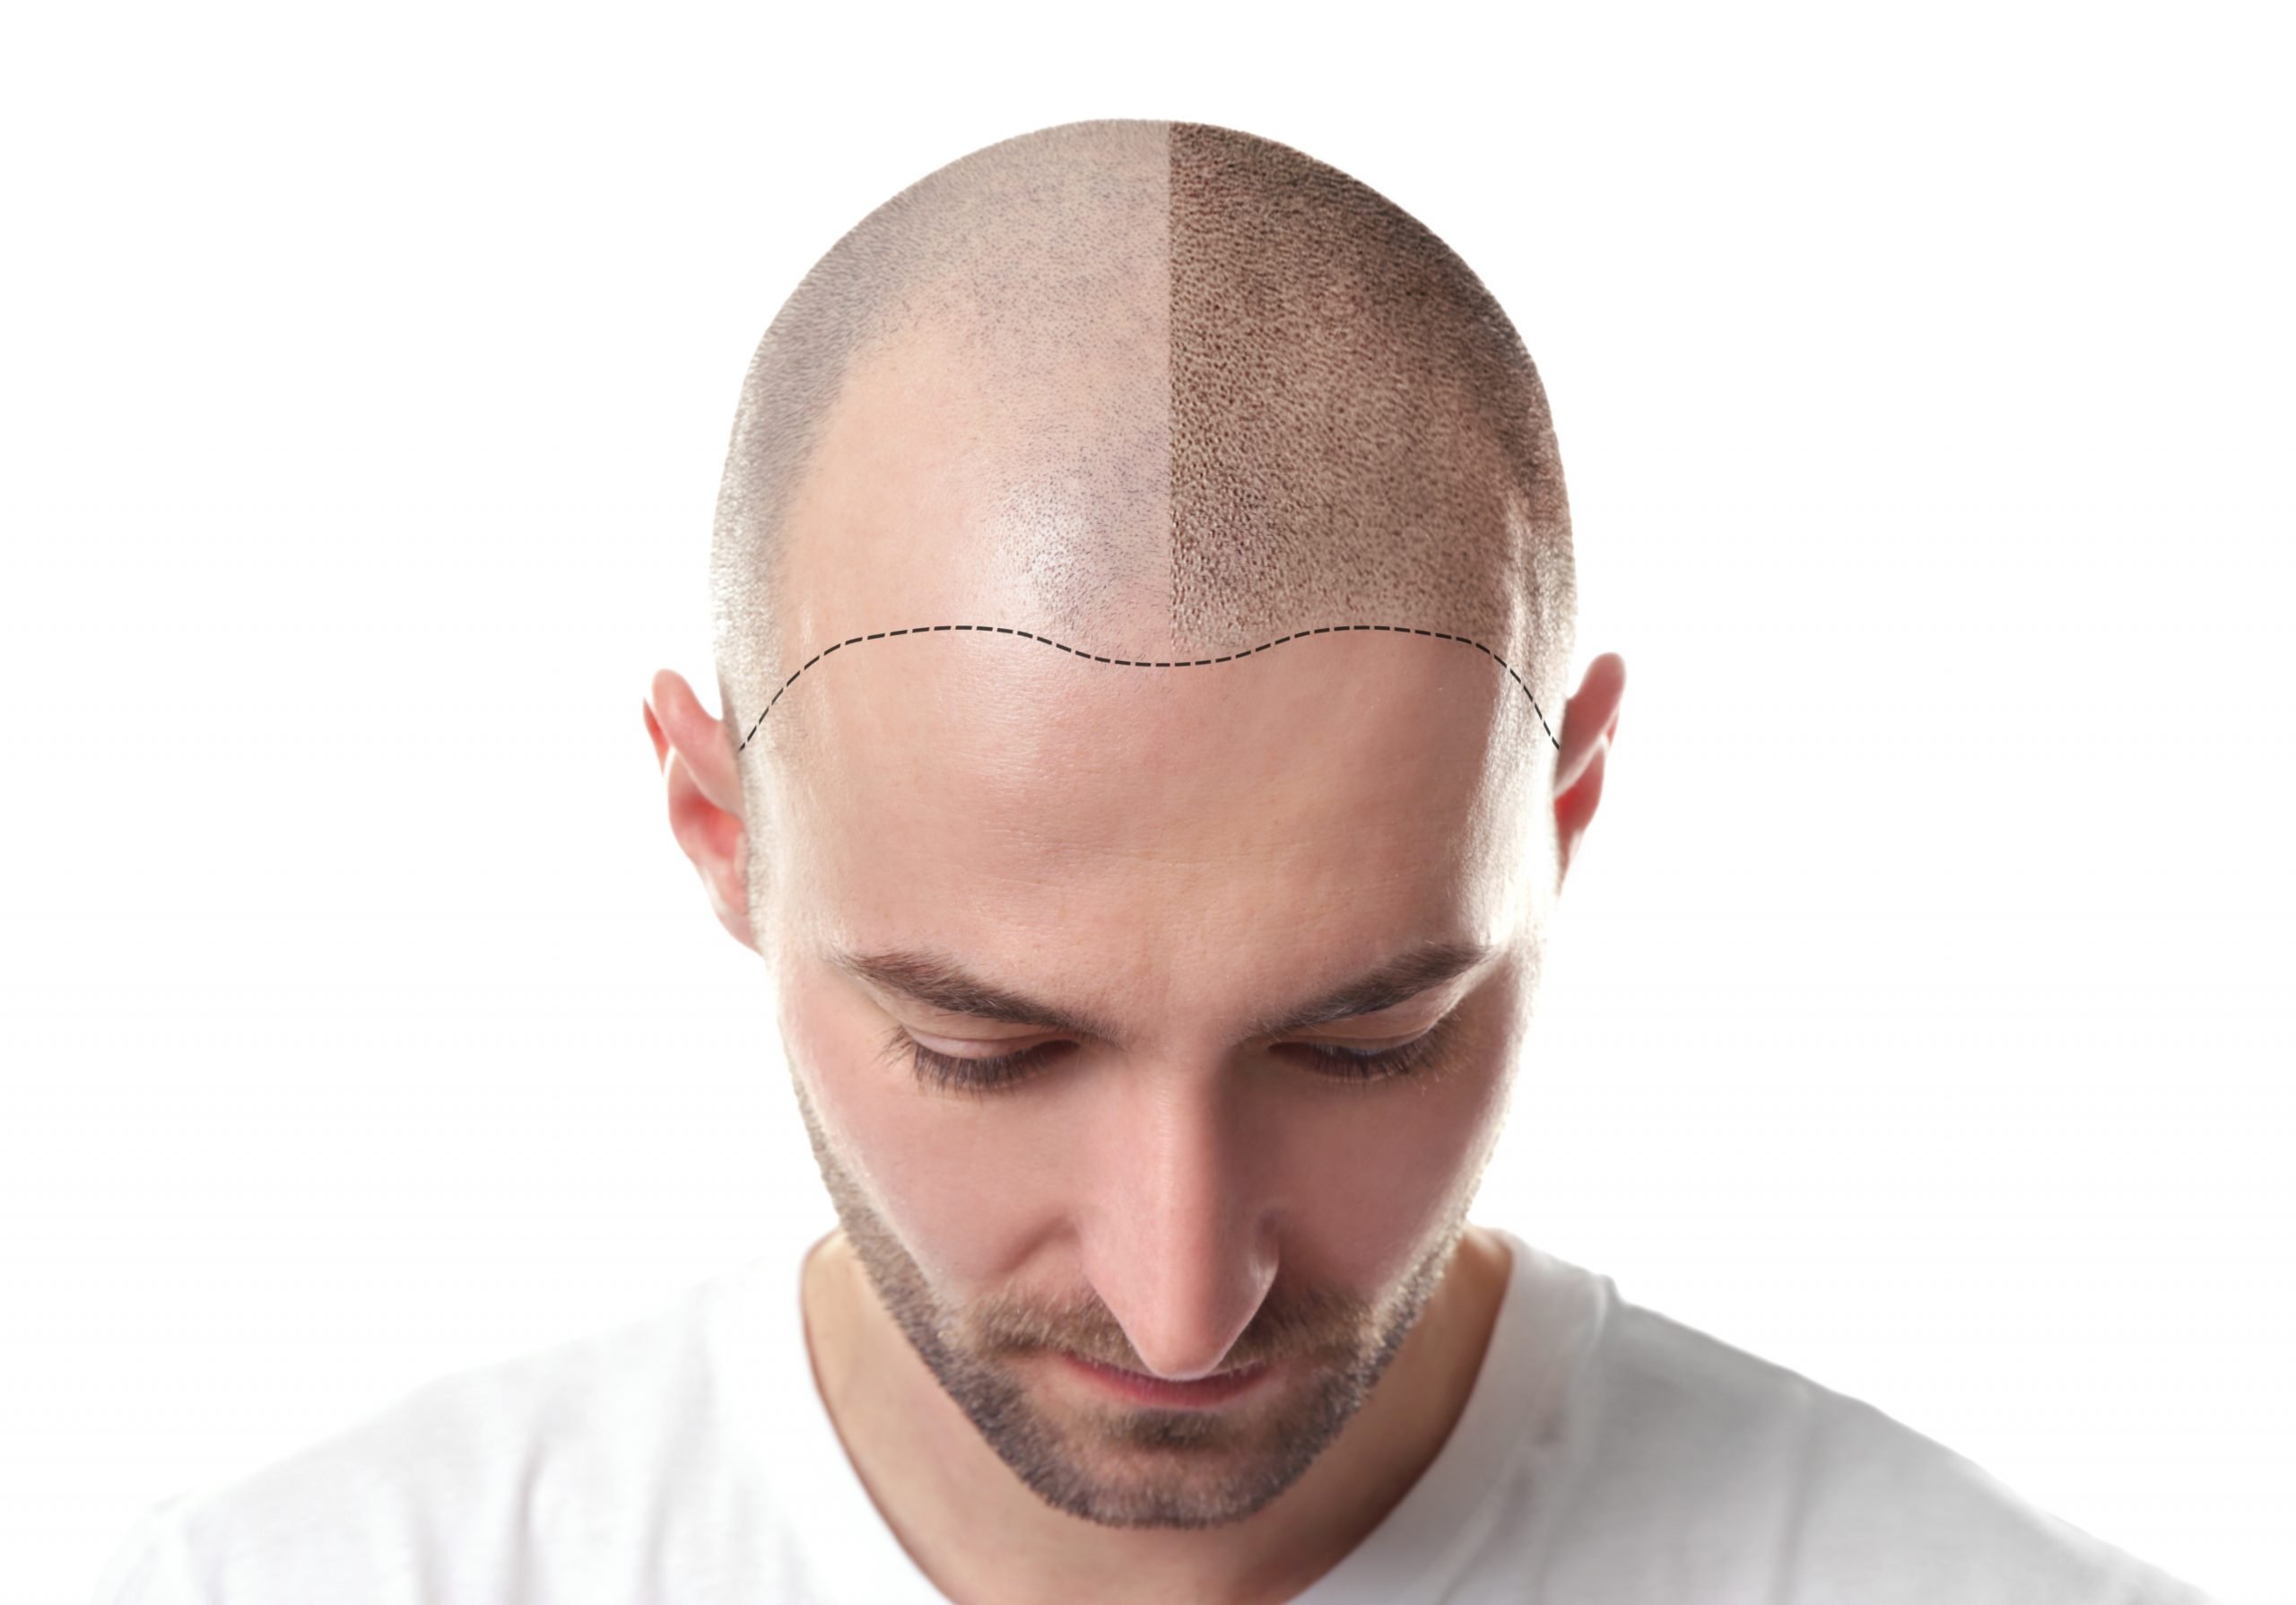 Scalp Micropigmentation Sydney is a Safe, Non-Surgical Treatment for Hair Loss